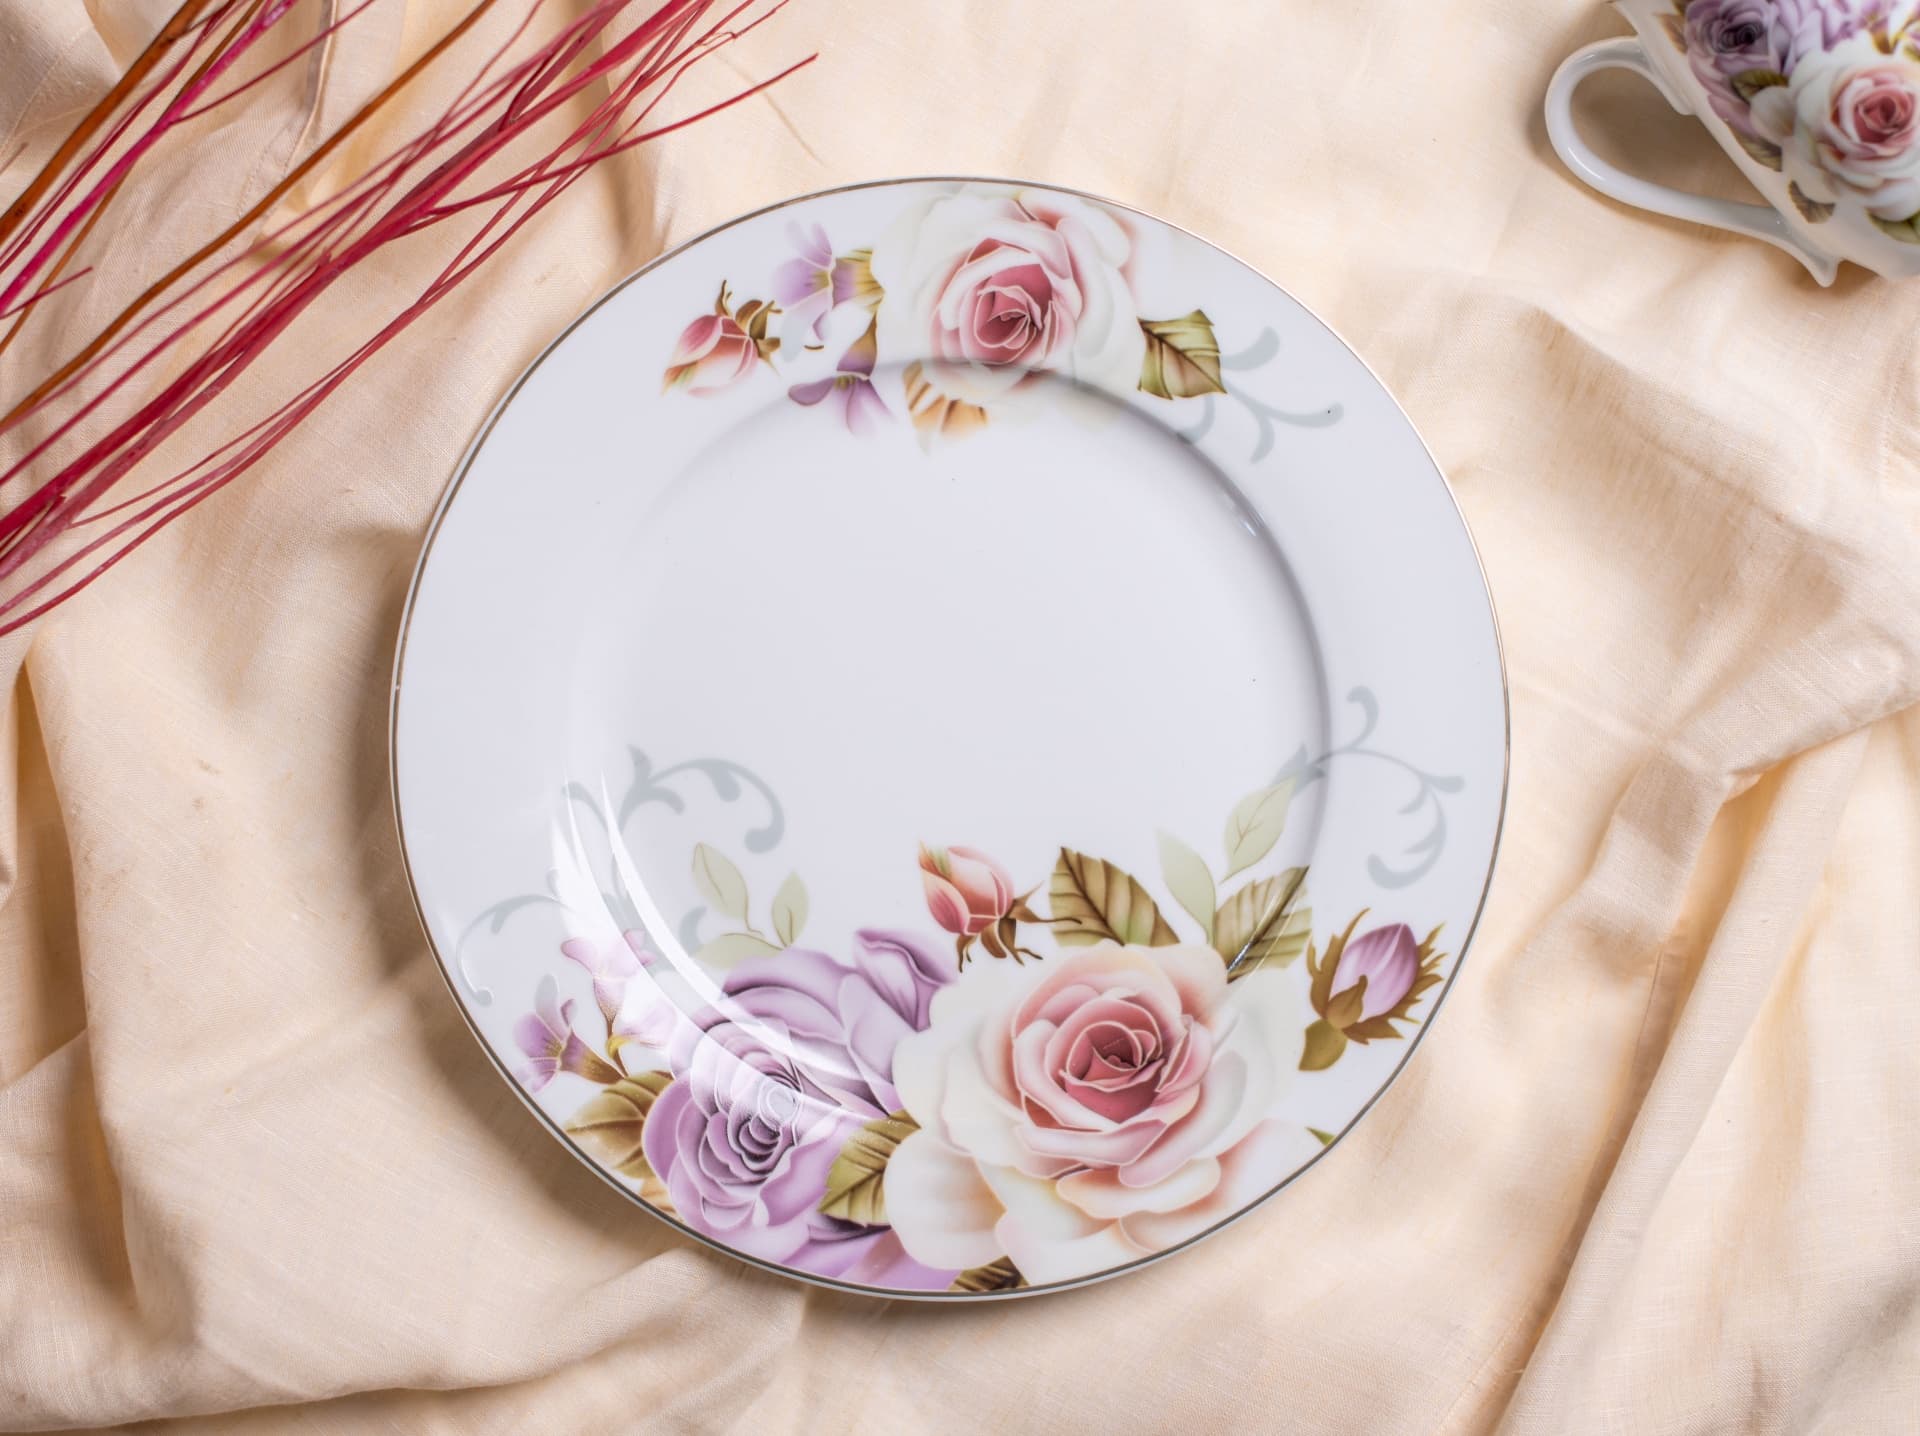 Dinner Plates Review: Top Picks for Stylish and Functional Tableware